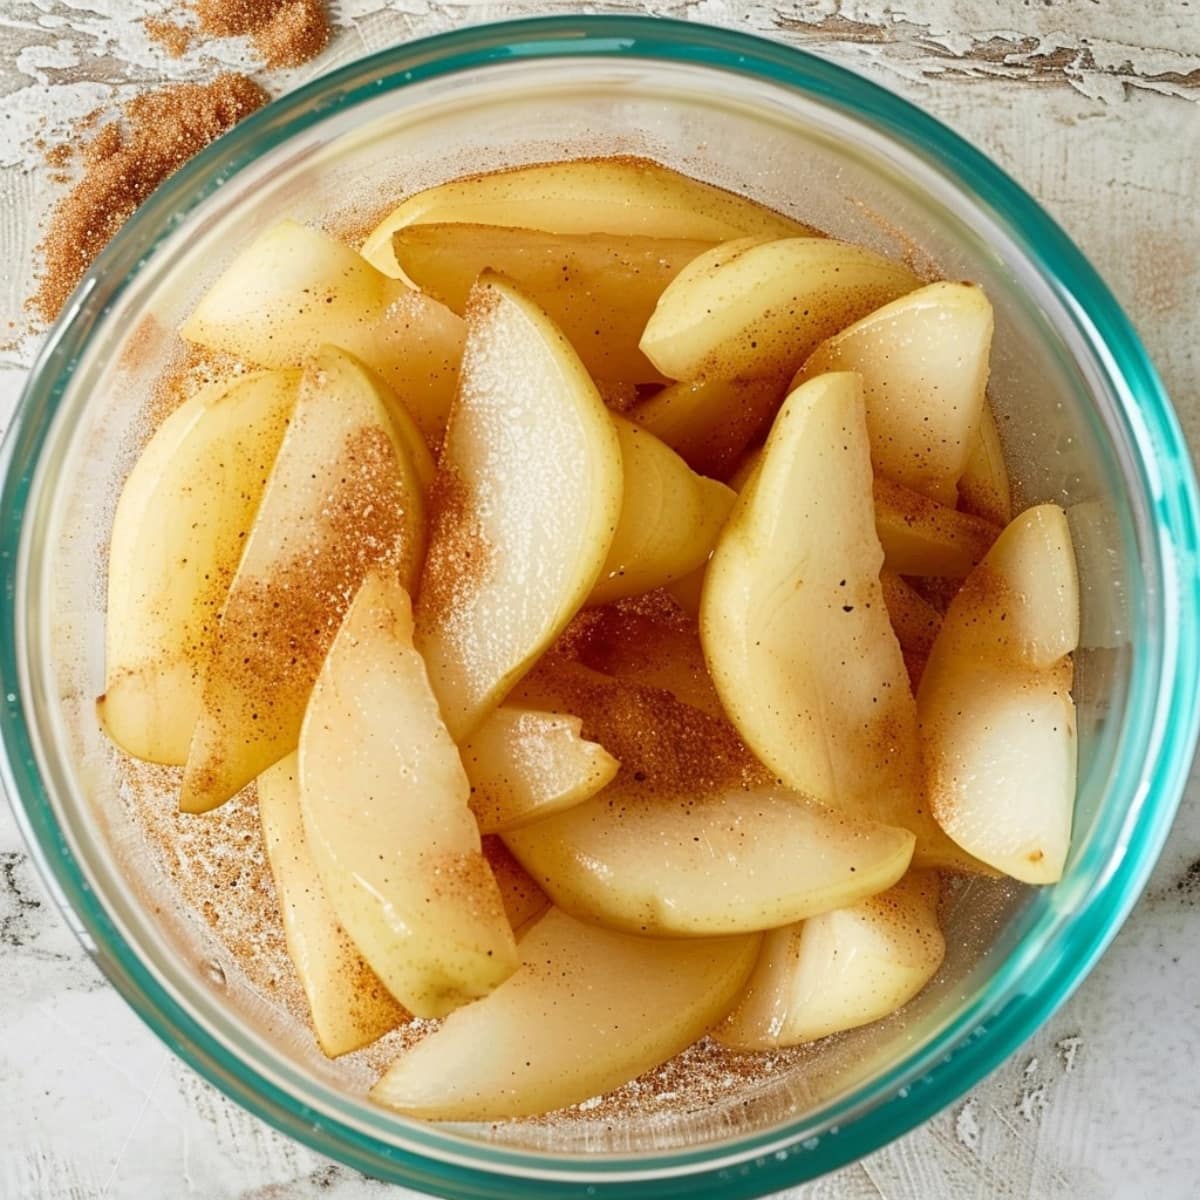 Slices of pear in a clear bowl with cinnamon and brown sugar.